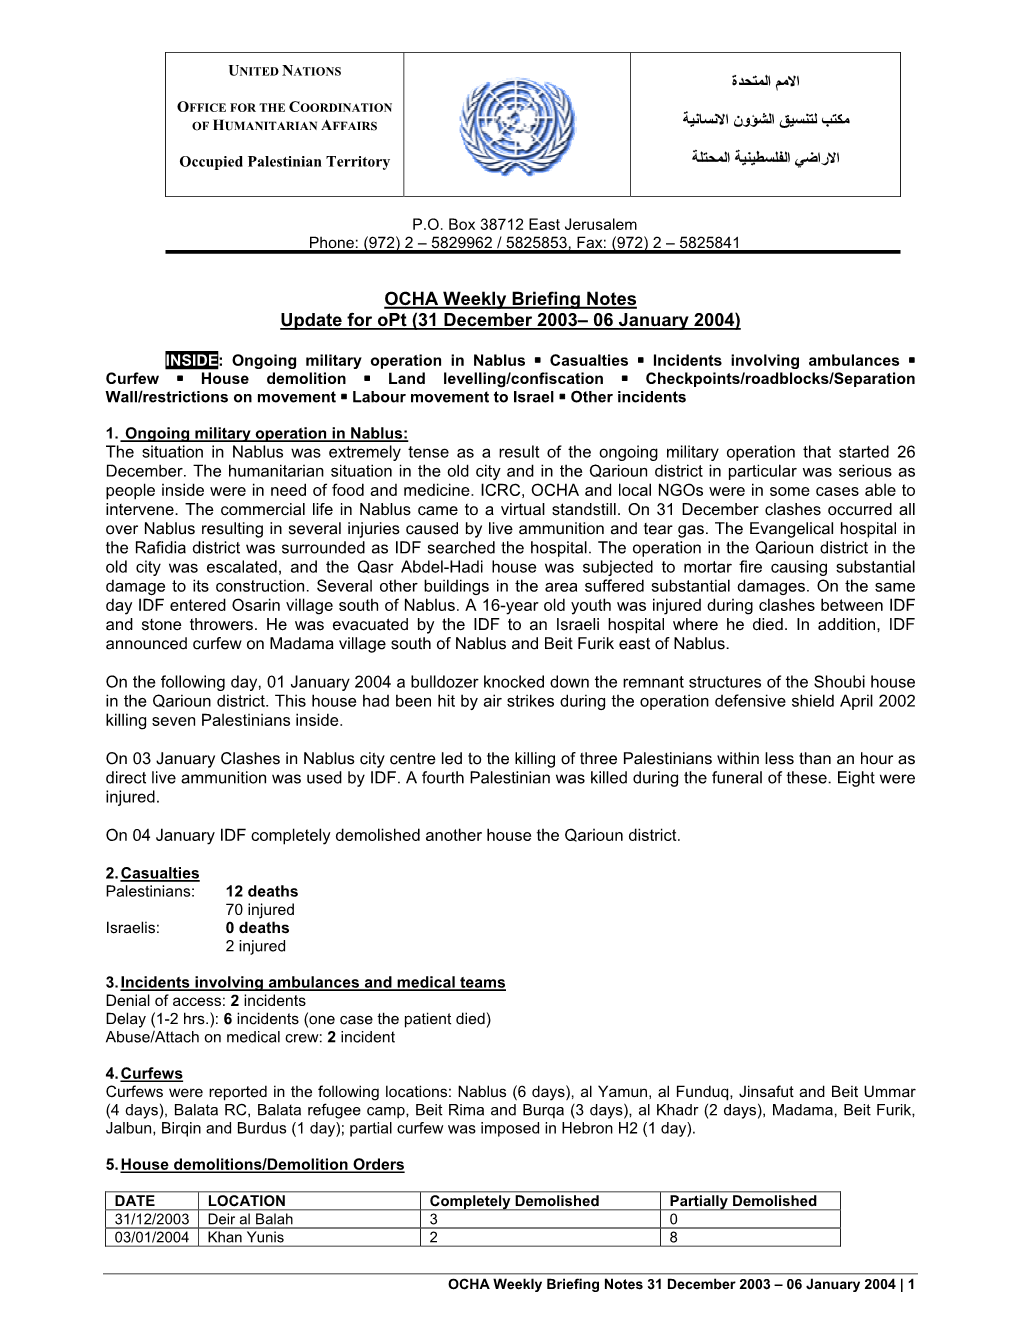 OCHA Weekly Briefing Notes Update for Opt (31 December 2003– 06 January 2004)